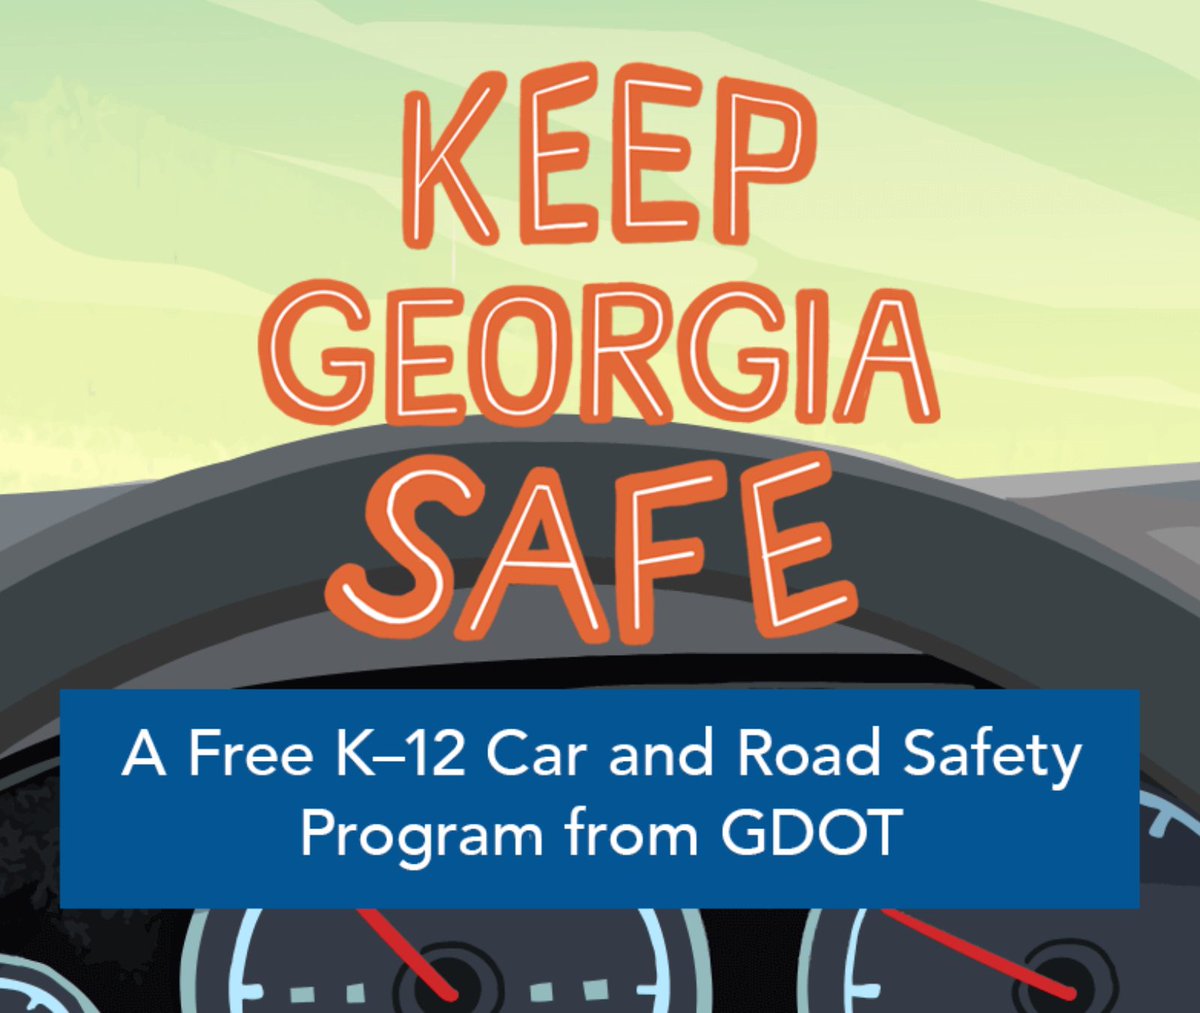 Happy National Teachers Day! GDOT applauds the hard work of our Georgia school teachers. GDOT has partnered with We Are Teachers to create the Keep Georgia Safe Program for teachers to use in their classrooms for grades K-12. For more info, visit dot.ga.gov/GDOT/Pages/GAR… #gdotne